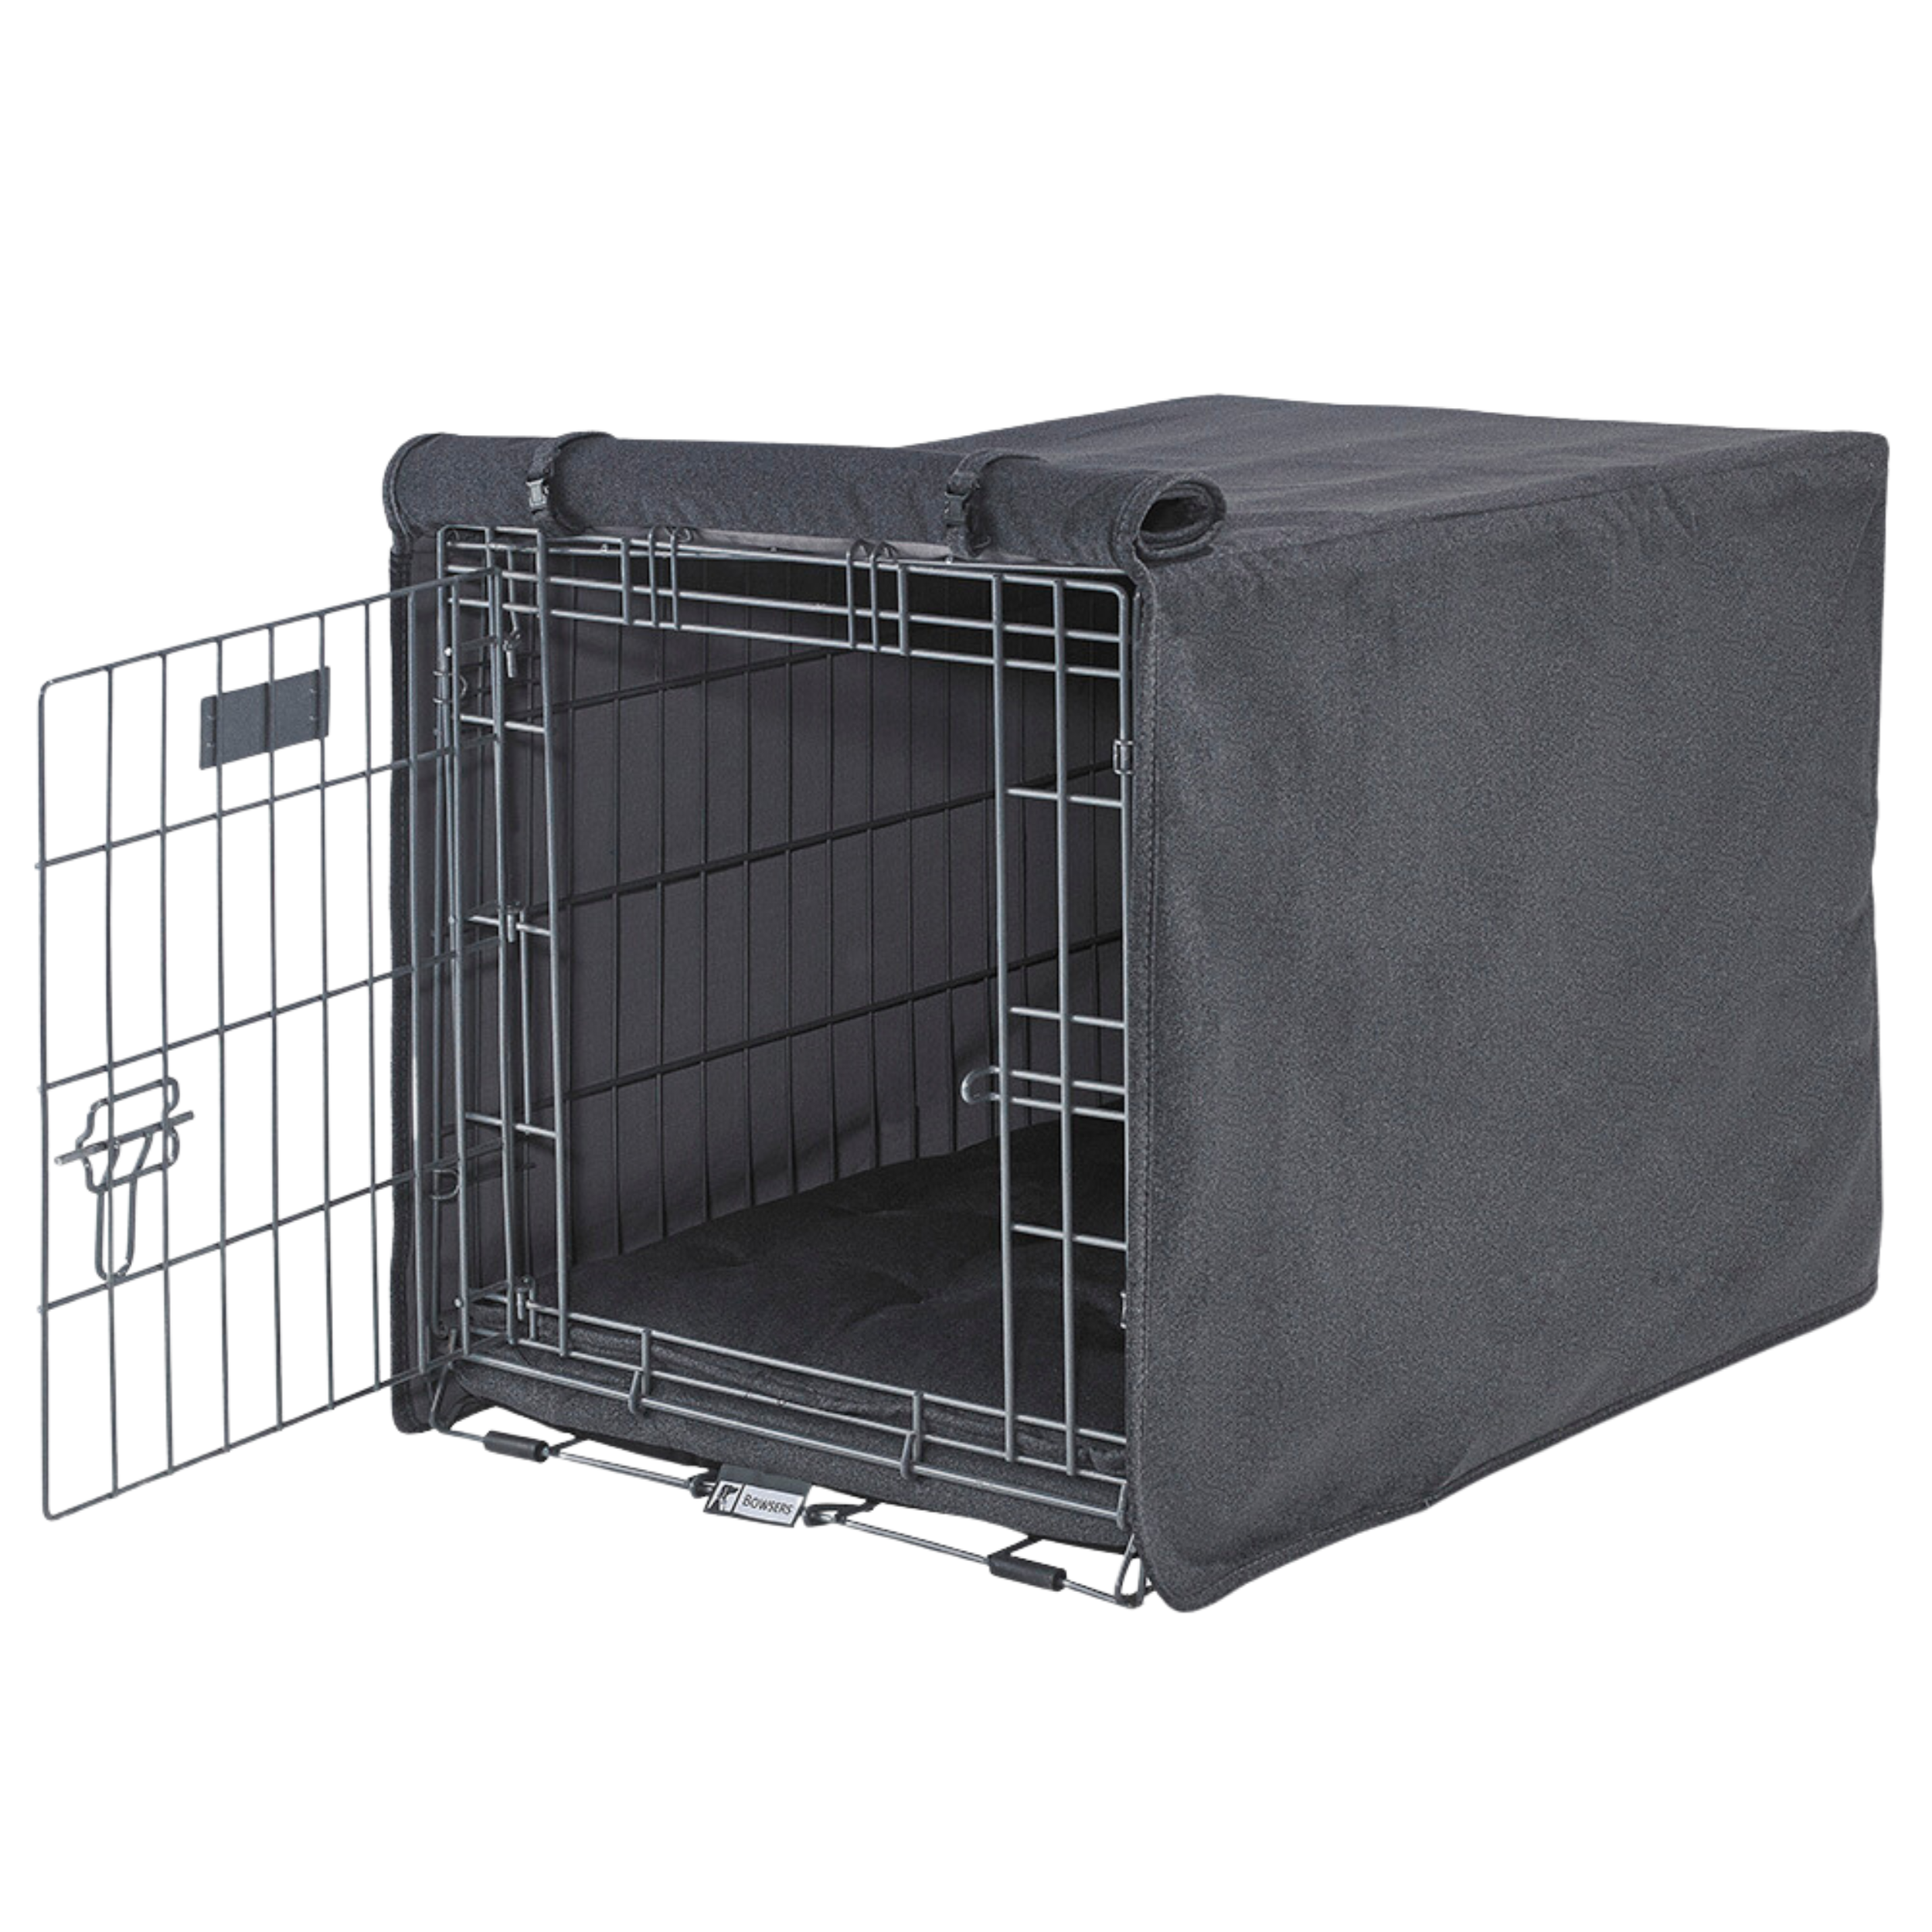 FLINT-LUXURY-CRATE-COVER